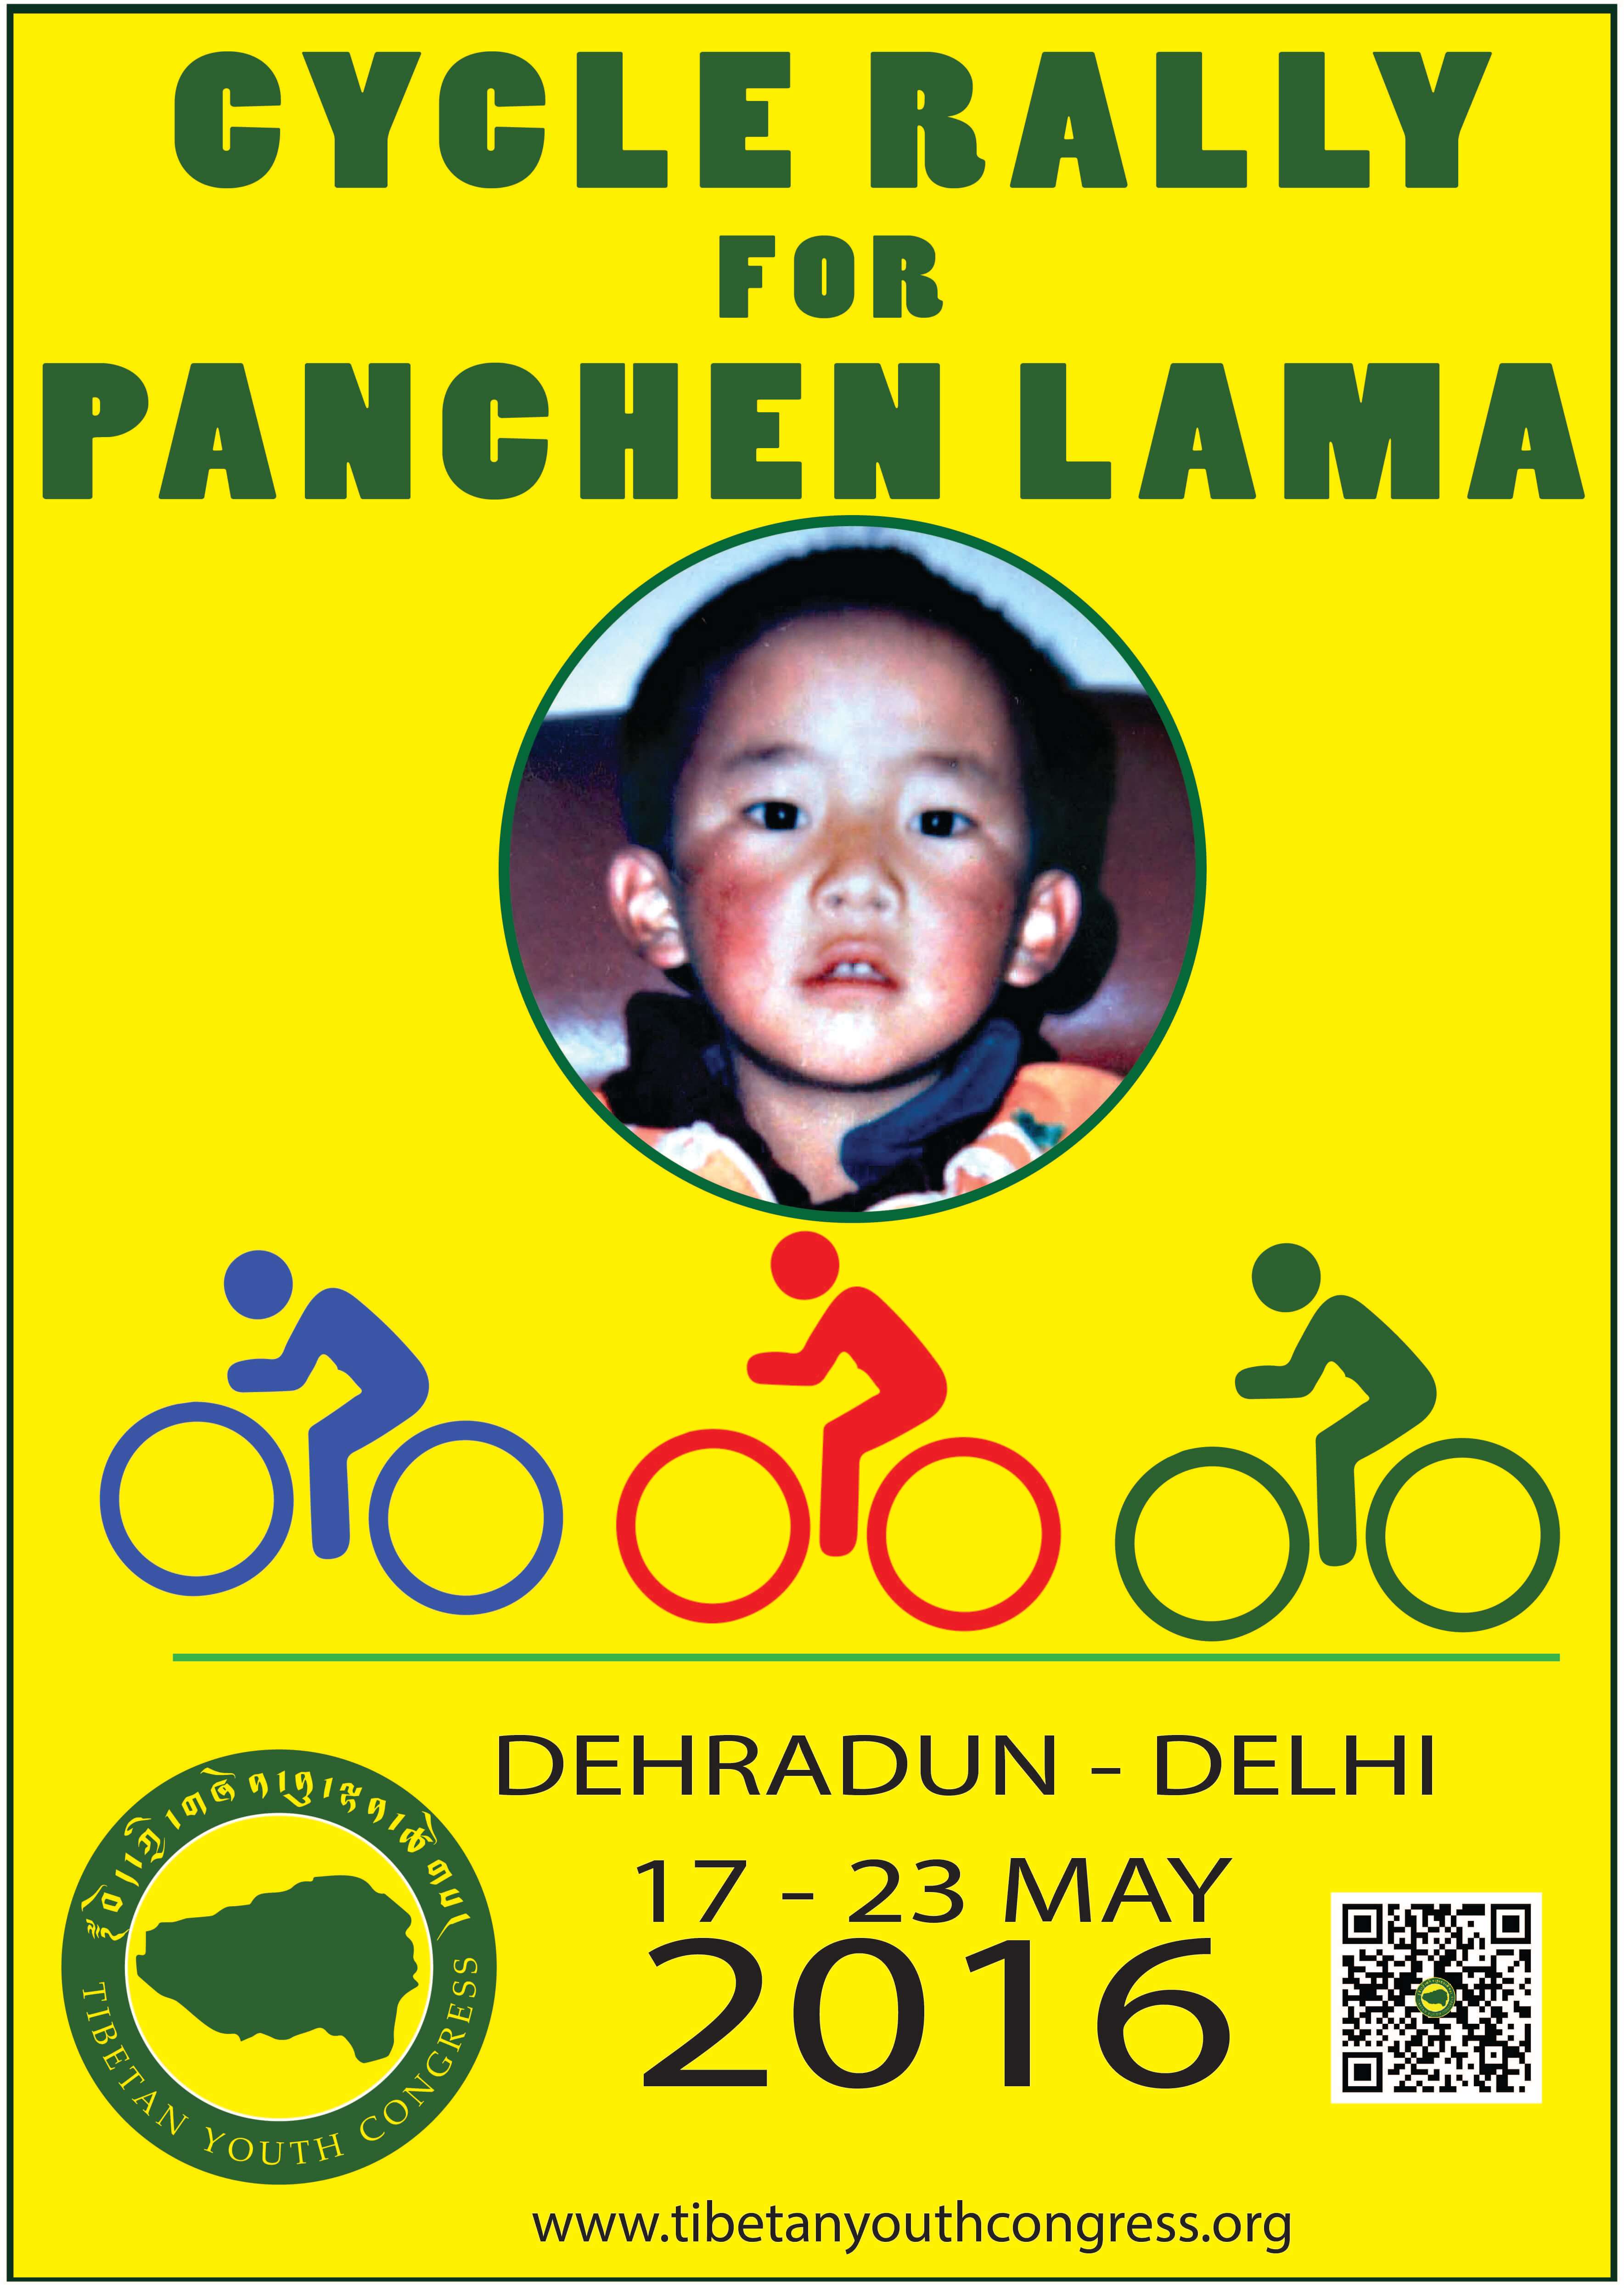 Cycle Rally for Panchen Lama